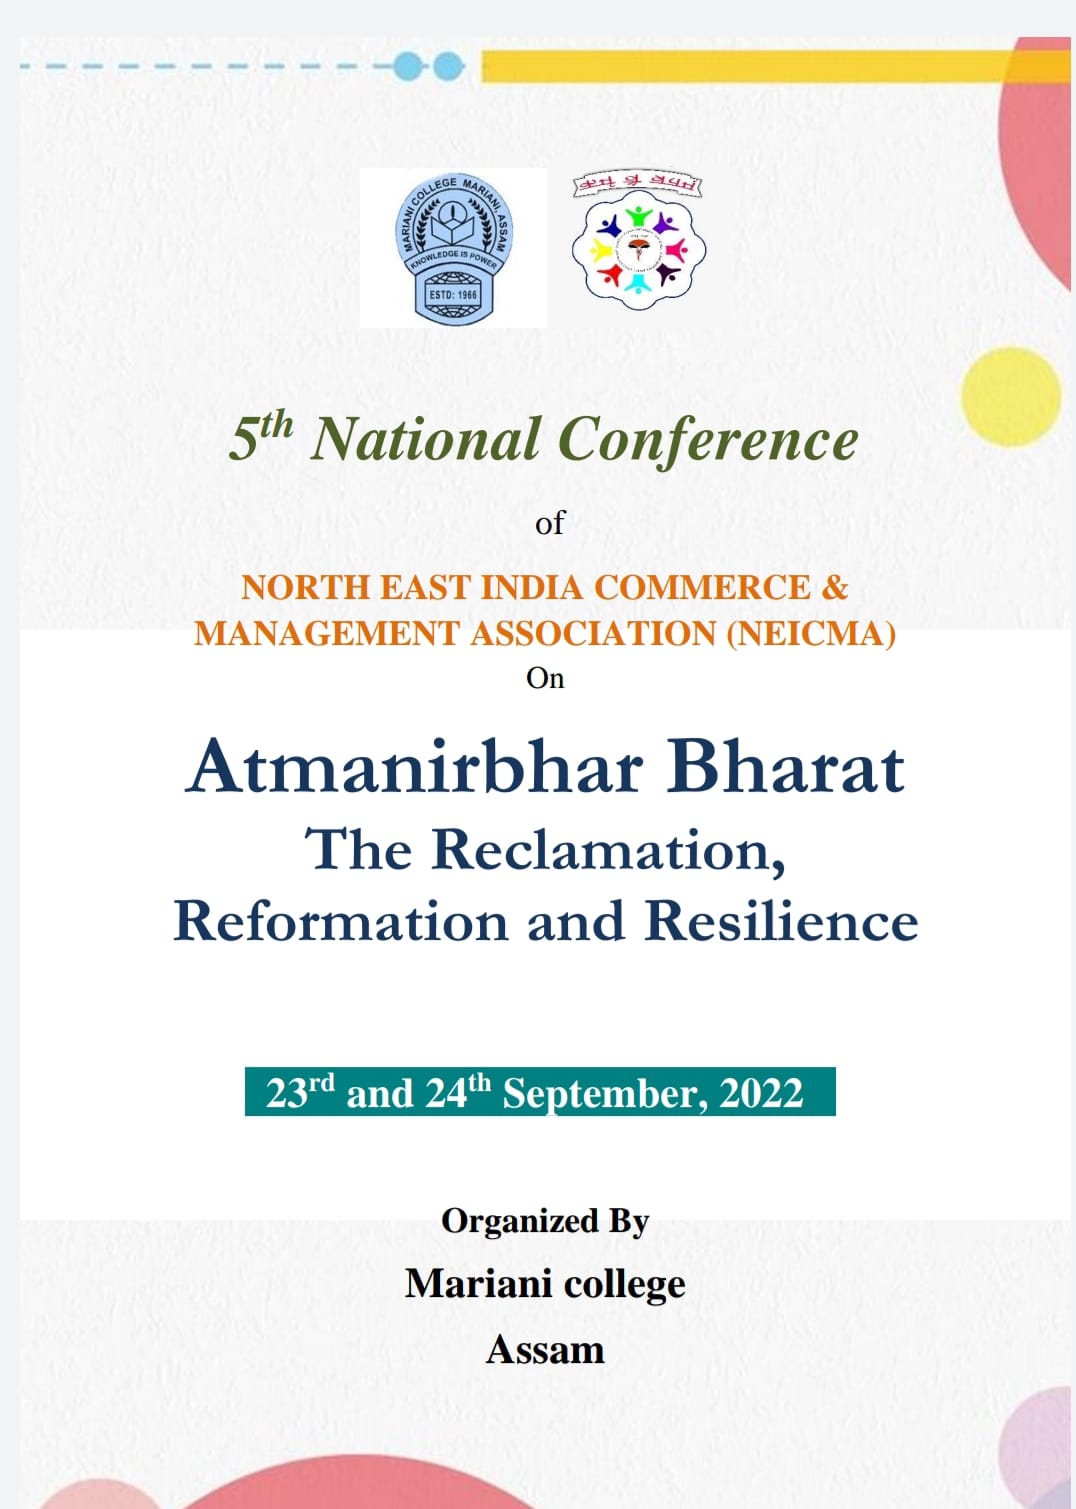 5th National Conference of NORTH EAST INDIA COMMERCE & MANAGEMENT ASSOCIATION (NEICMA) on Atmanirbhar Bharat: The Reclamation,  Reformation and Resilience  